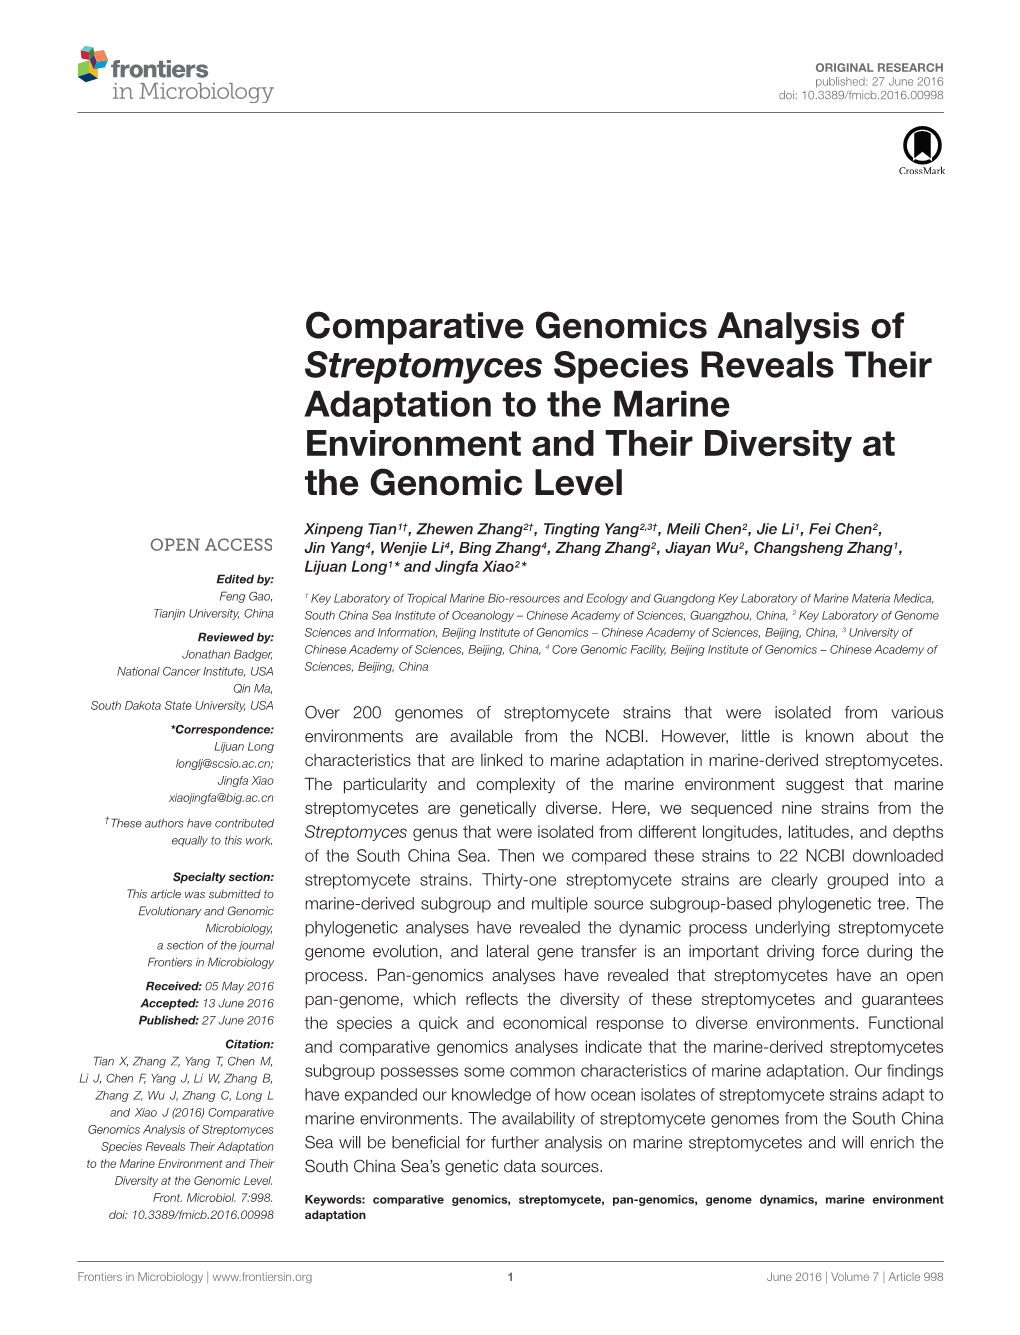 Comparative Genomics Analysis of Streptomyces Species Reveals Their Adaptation to the Marine Environment and Their Diversity at the Genomic Level